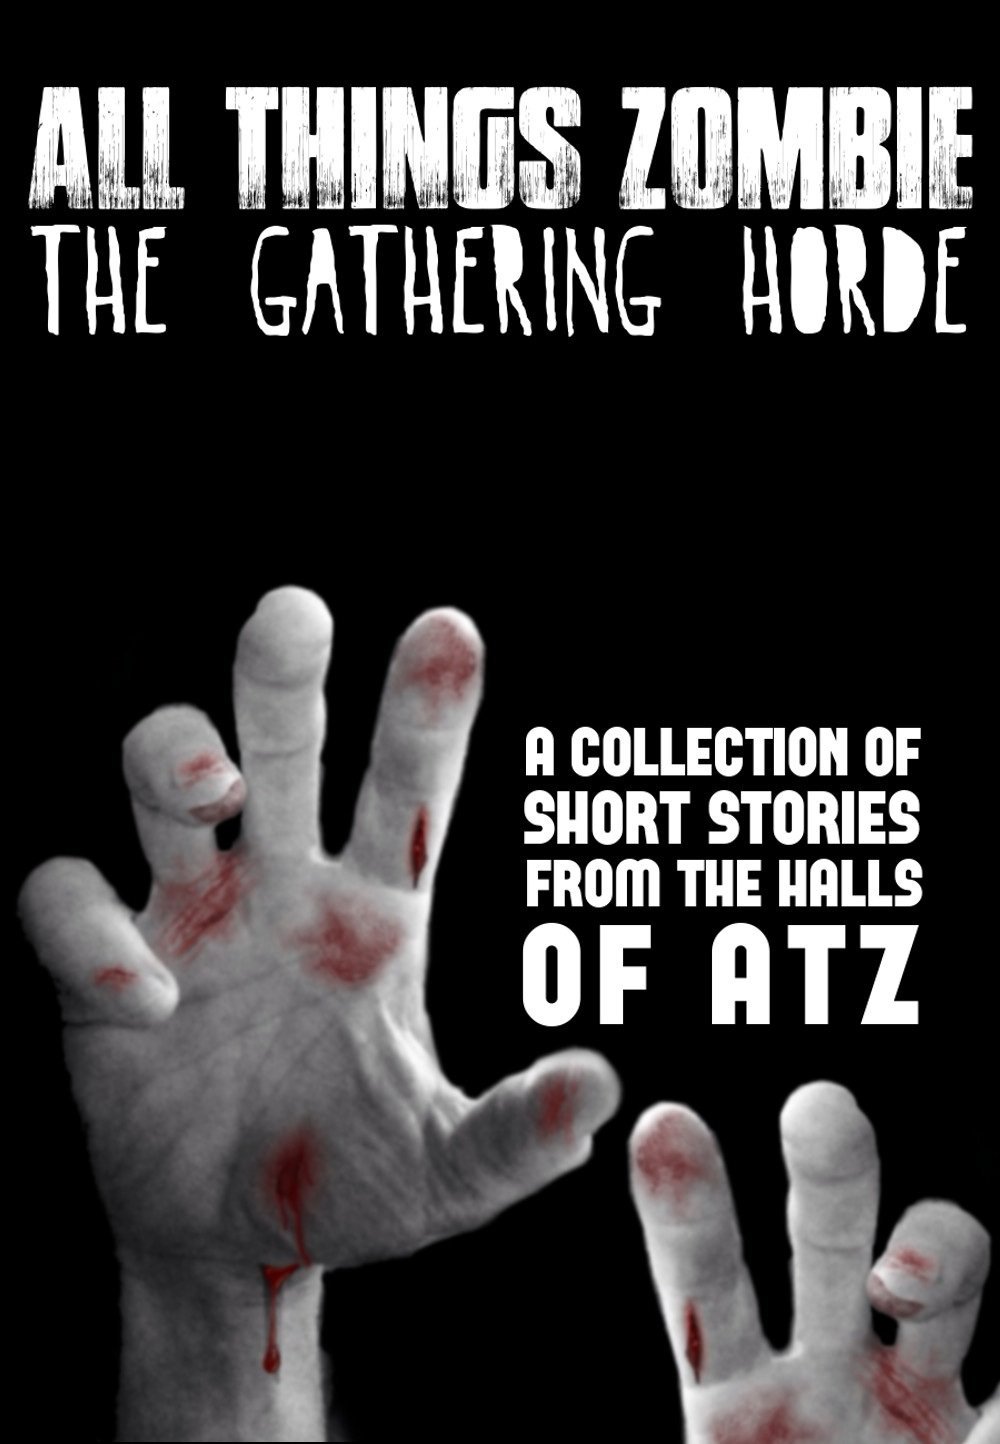 All Things Zombieâ€“ Short Story Collection